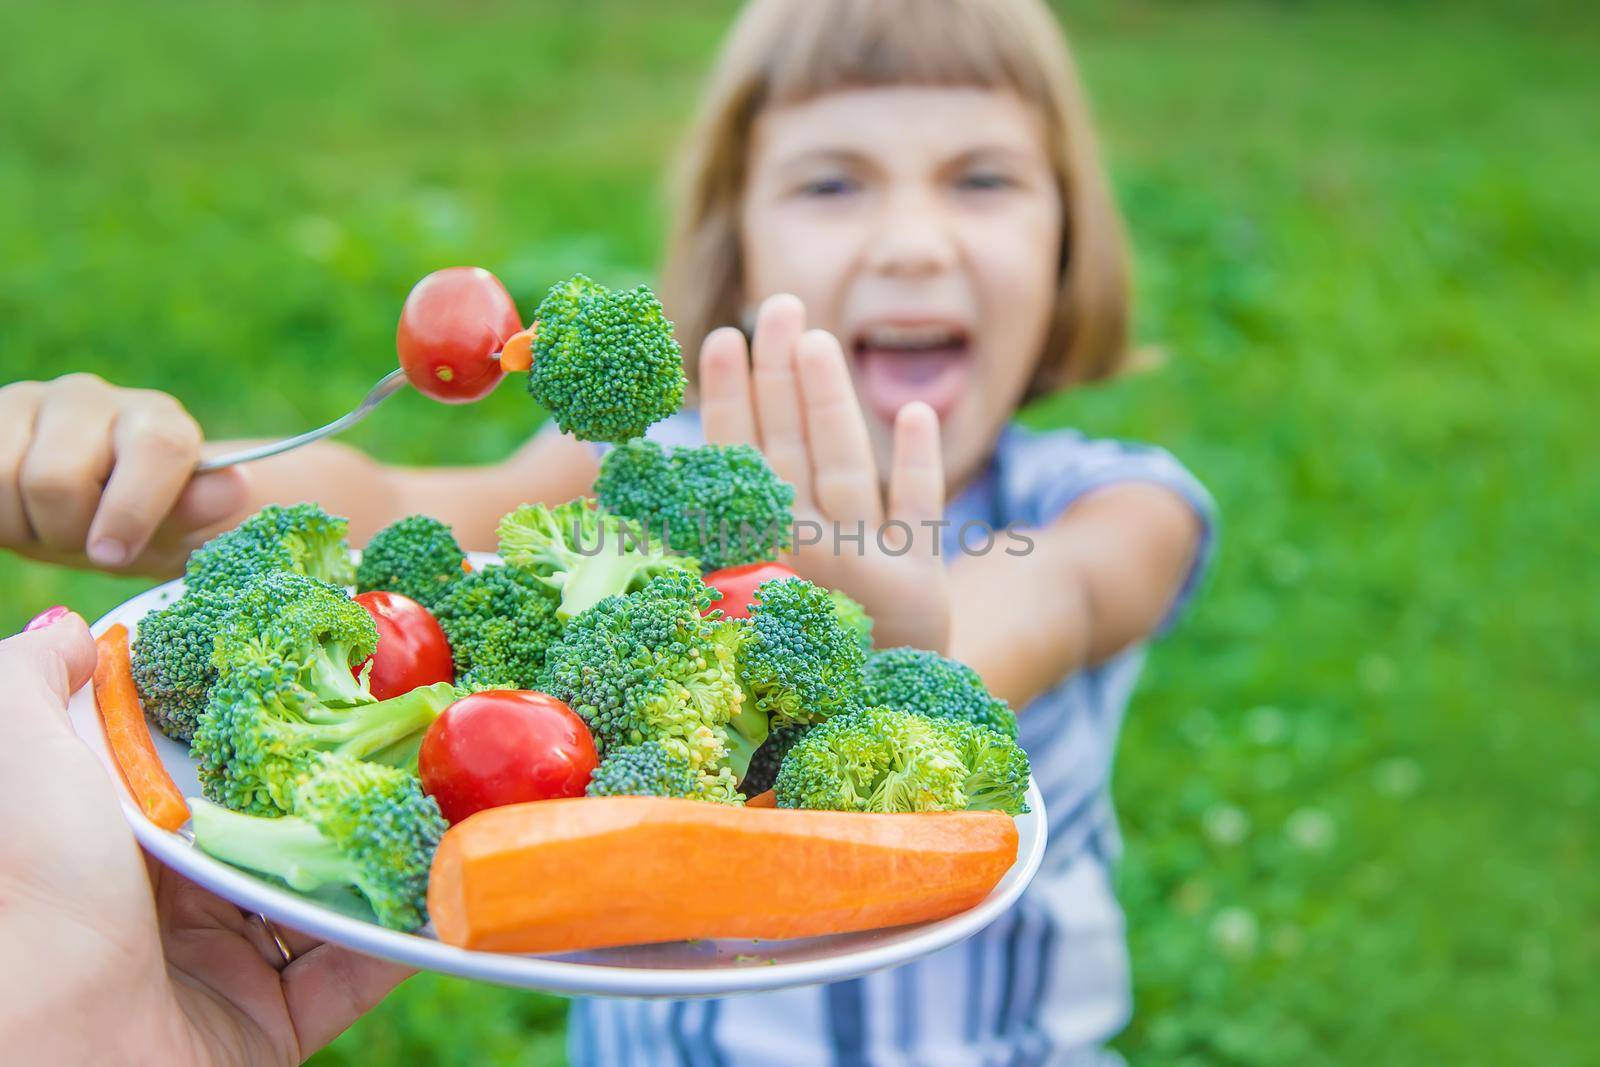 child eats vegetables broccoli and carrots. Selective focus.